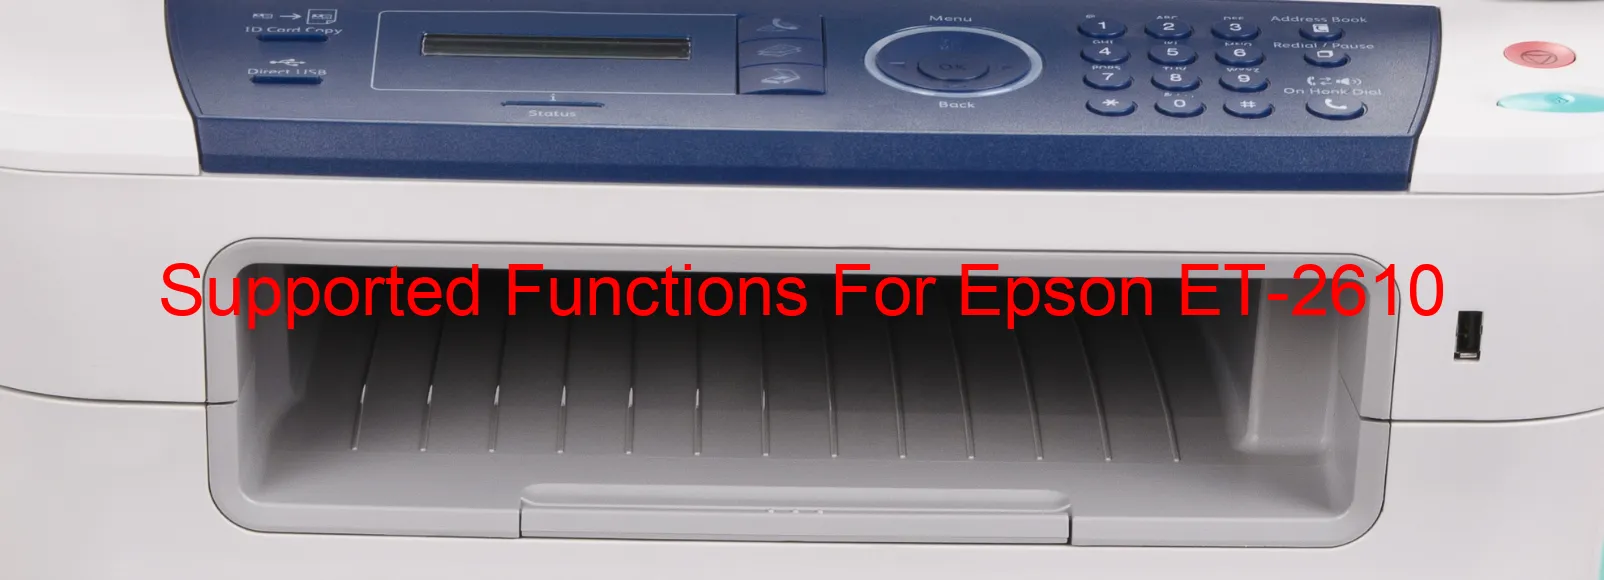 supported-functions-for-epson-et-2610.webp